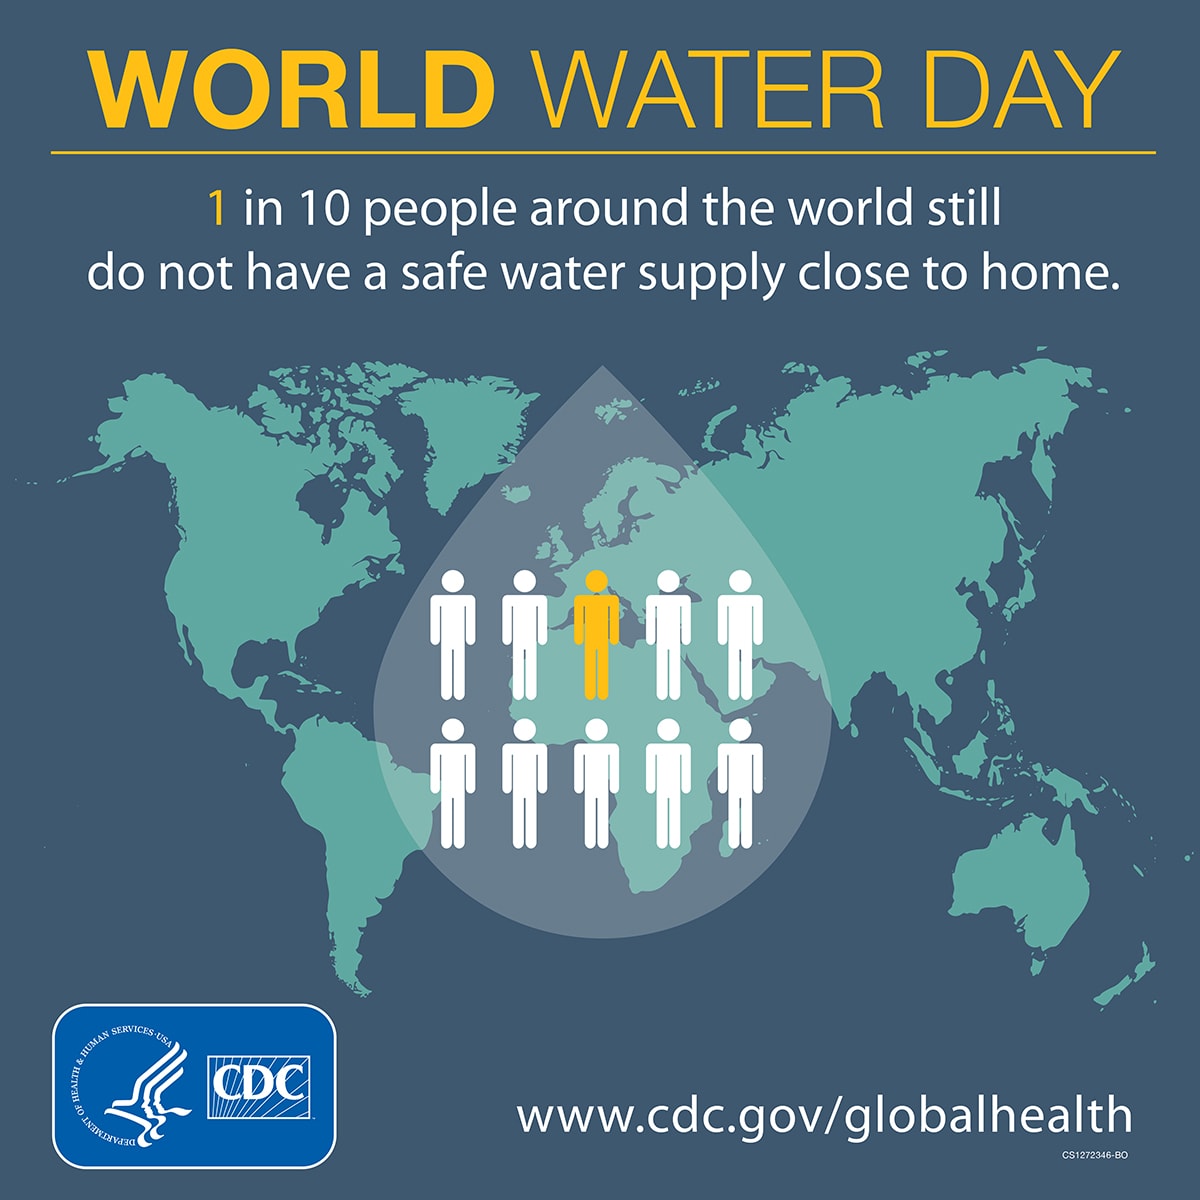 World Water Day - 1 in 10 people around the world still do not have a safe water supply close to home